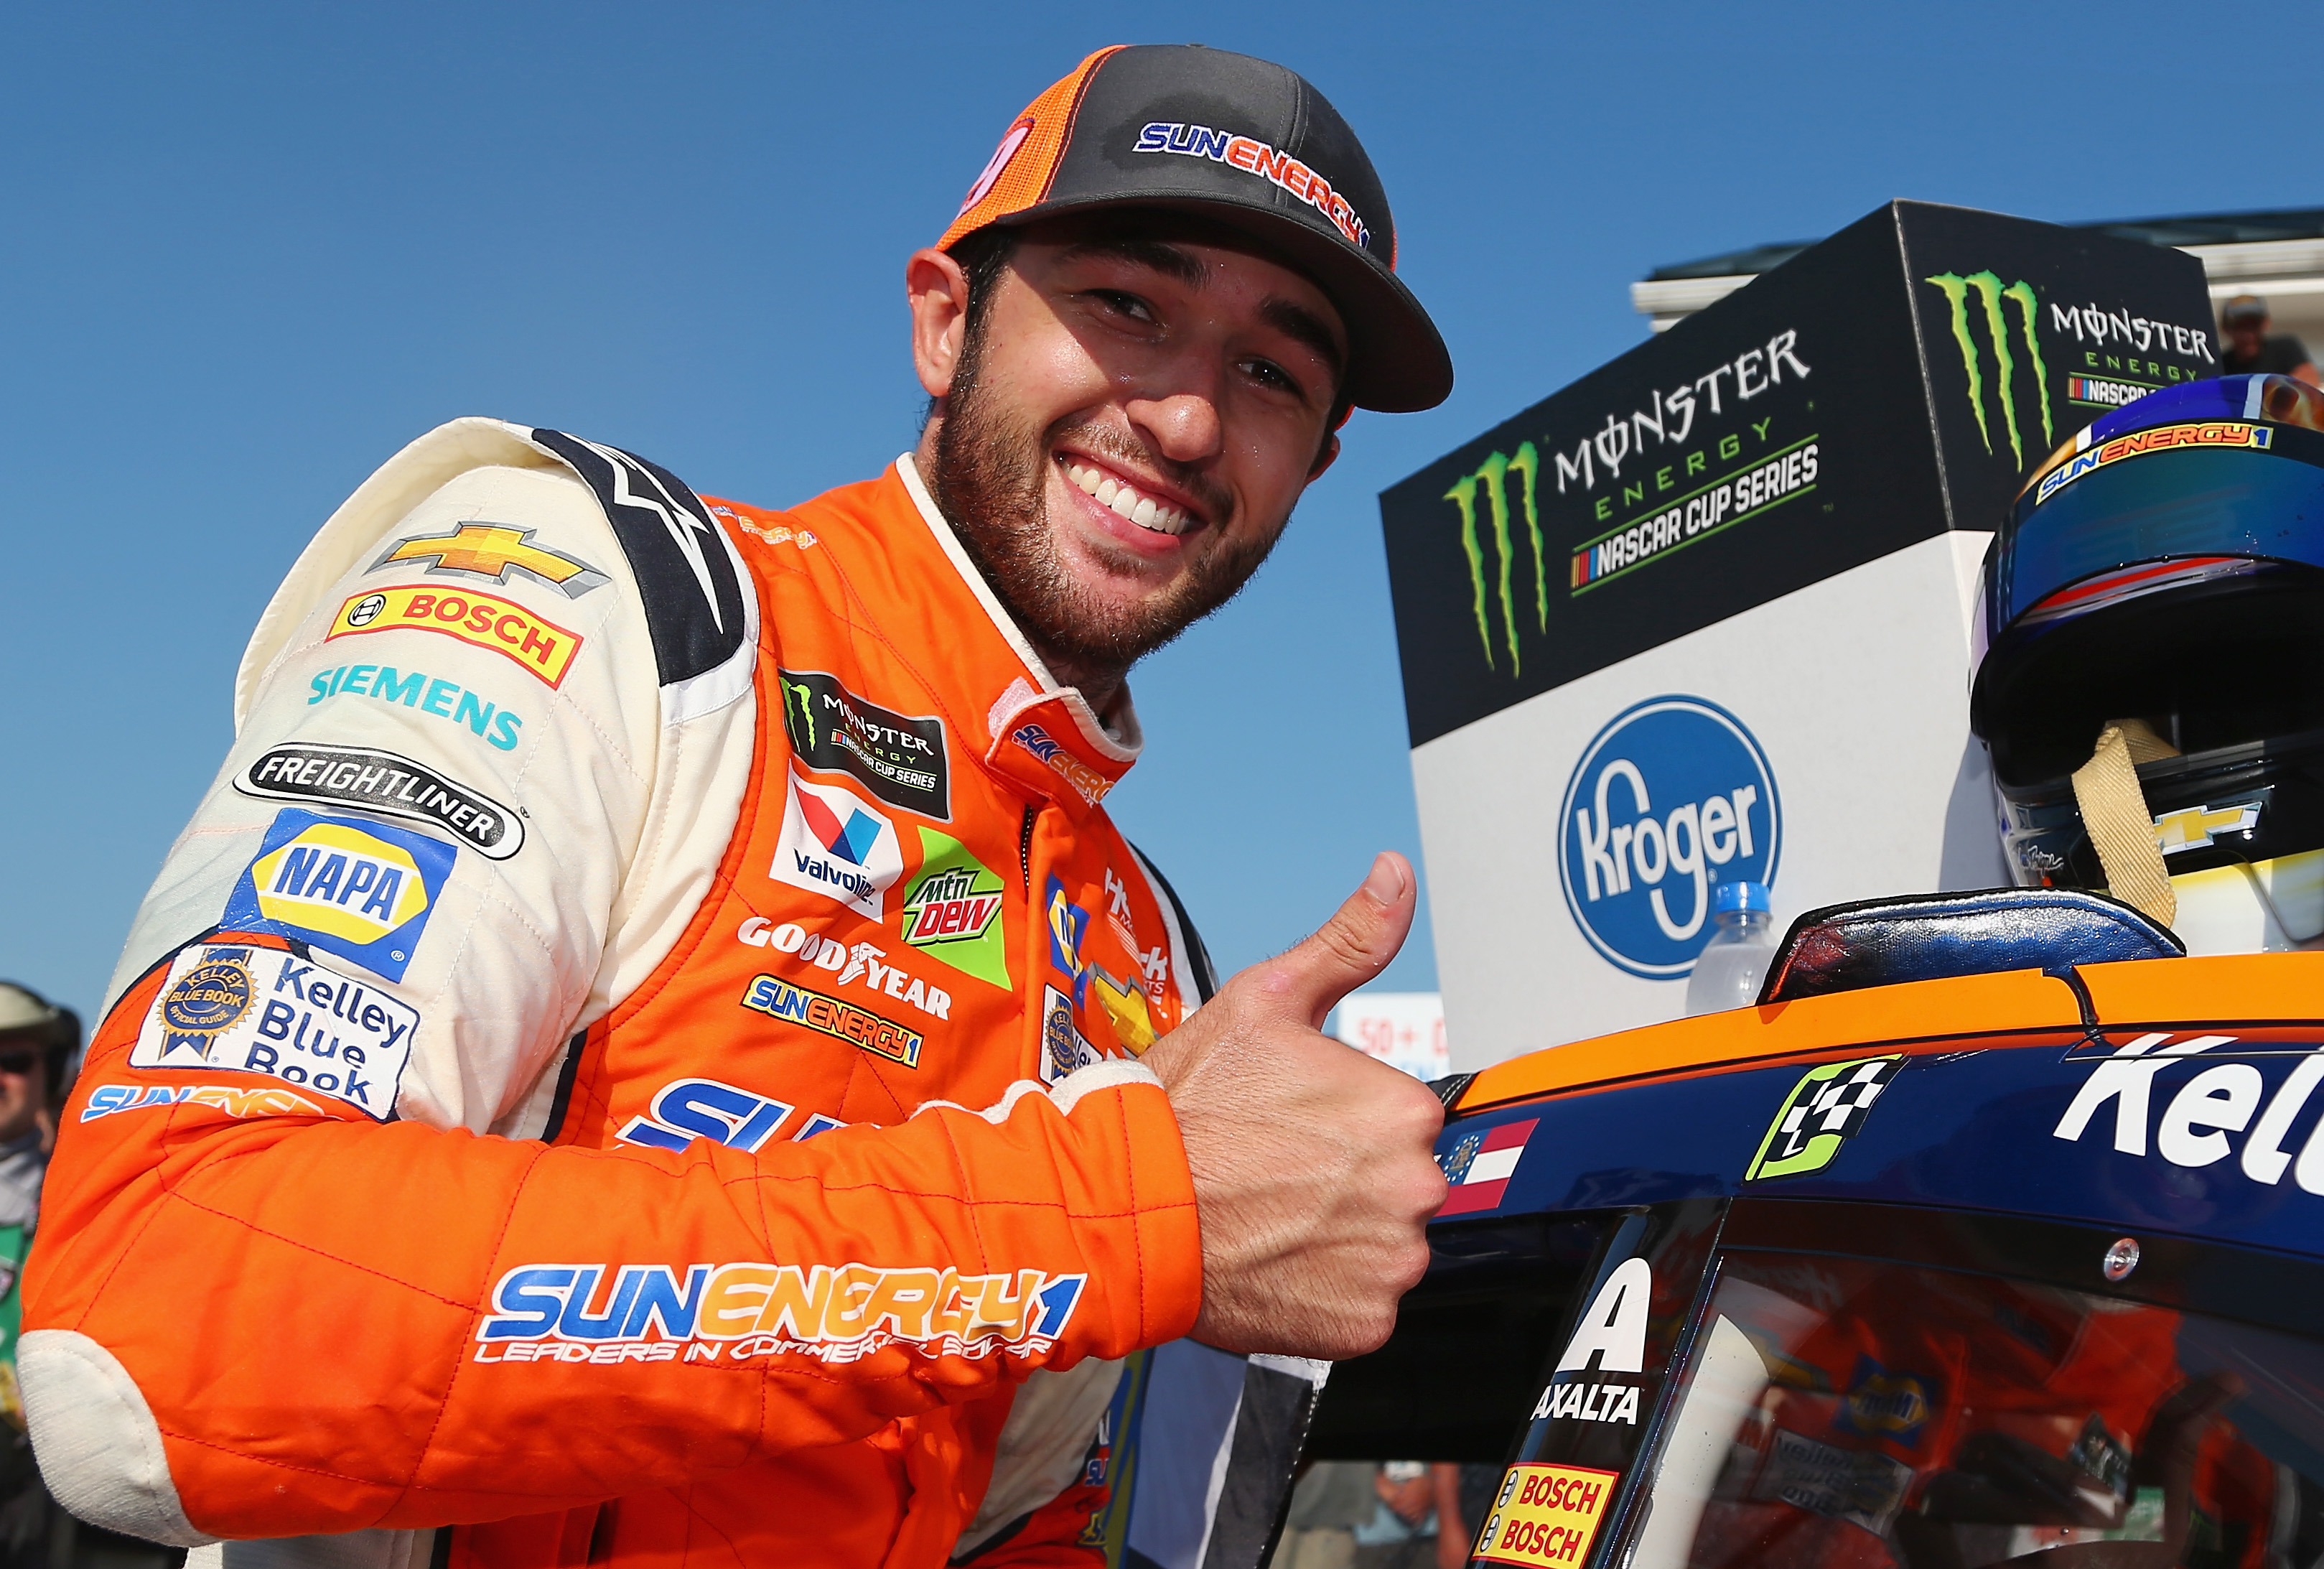 Chase Elliott Scores His First Career Cup Series Win at Watkins Glen